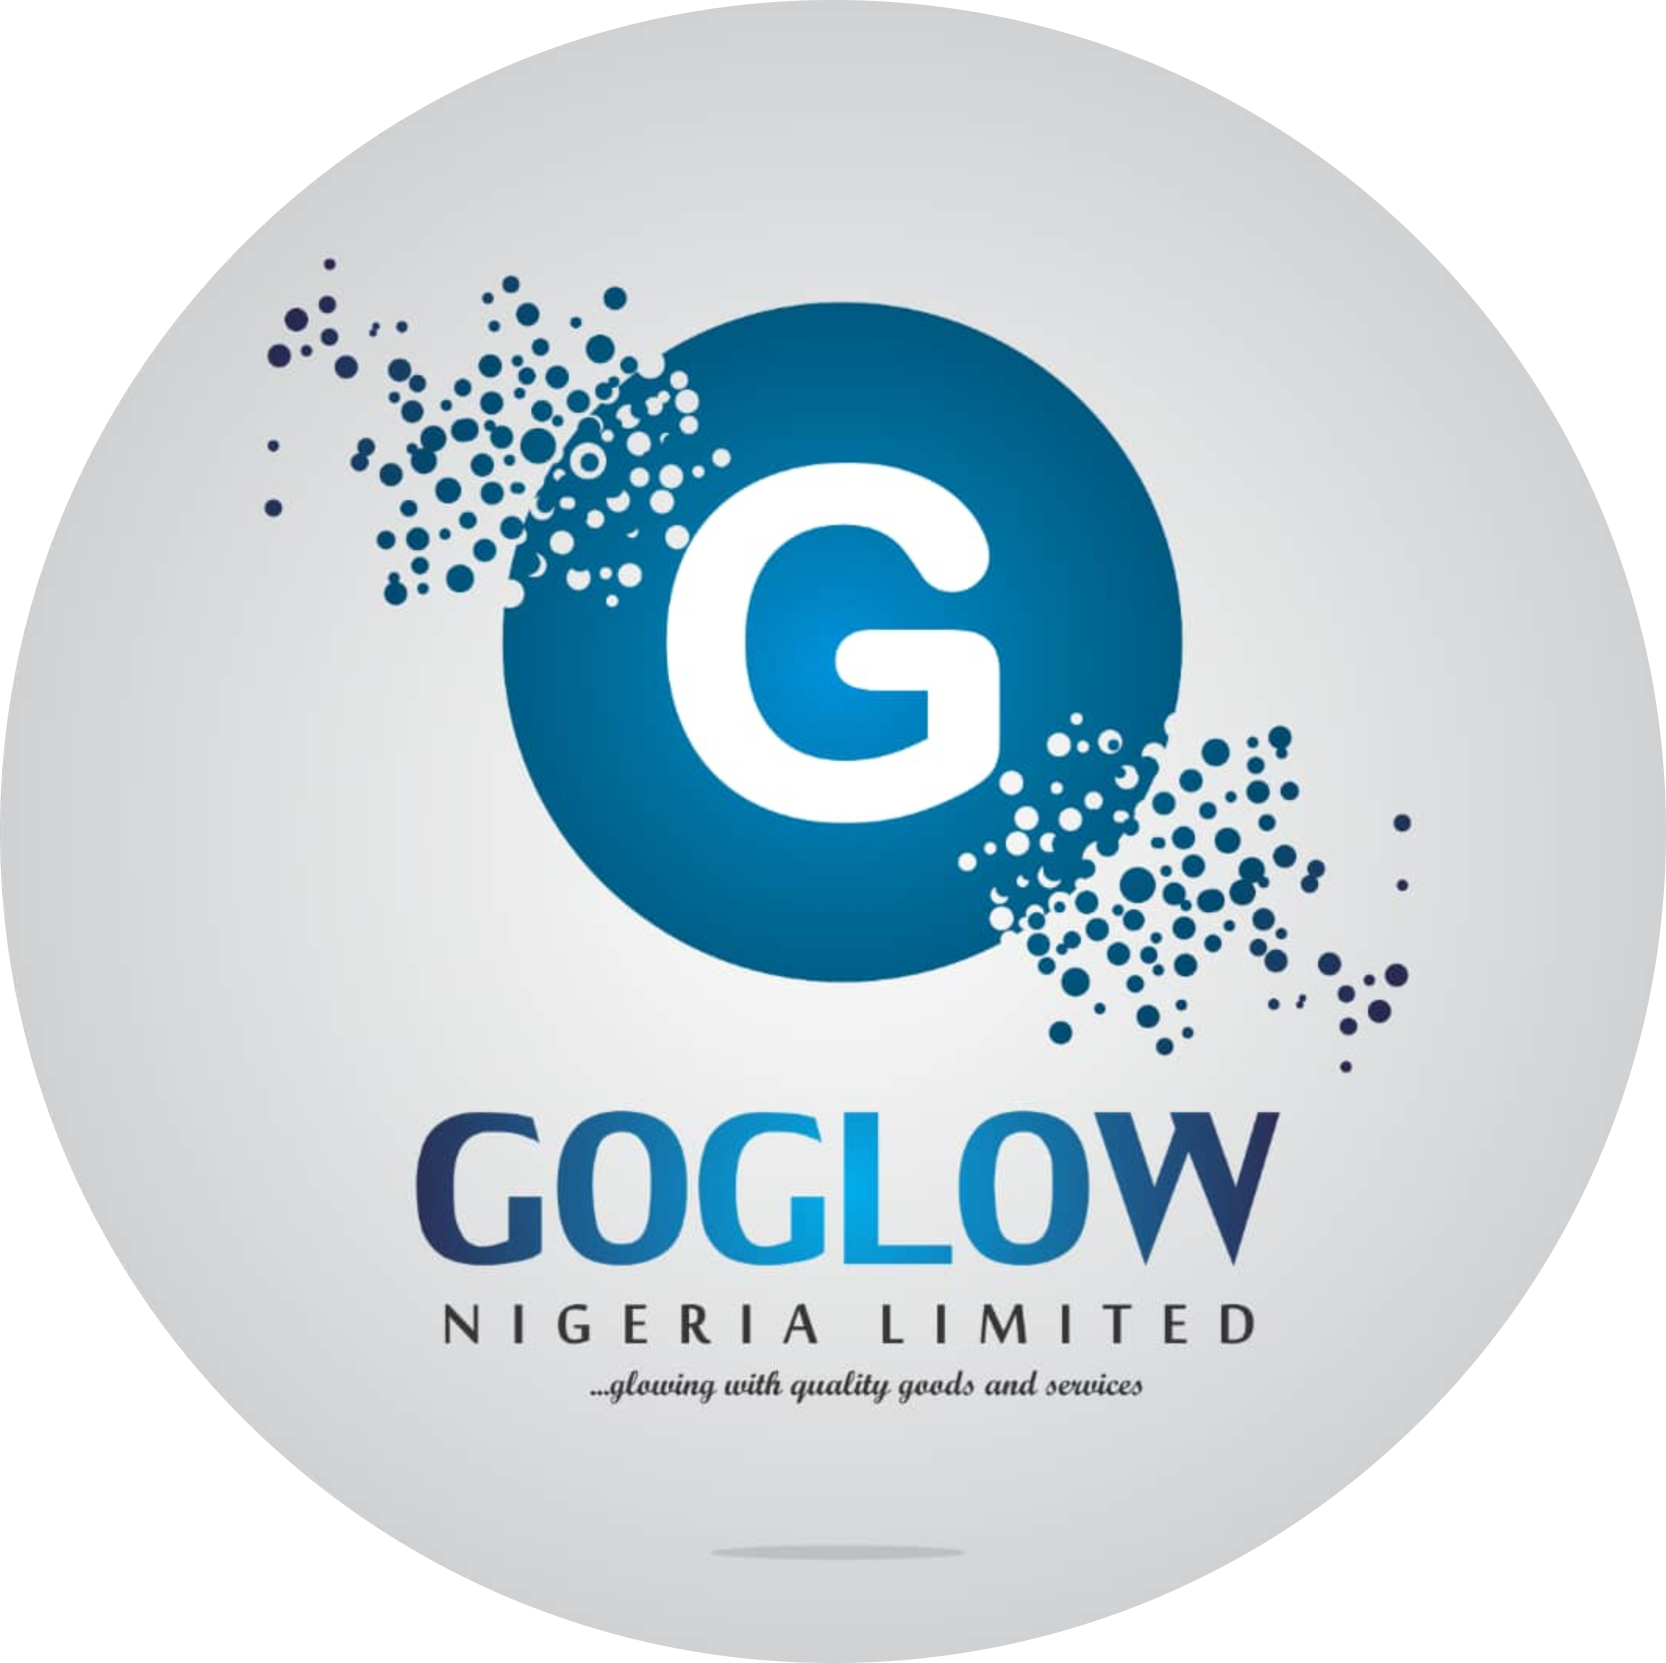 Goglow Limited